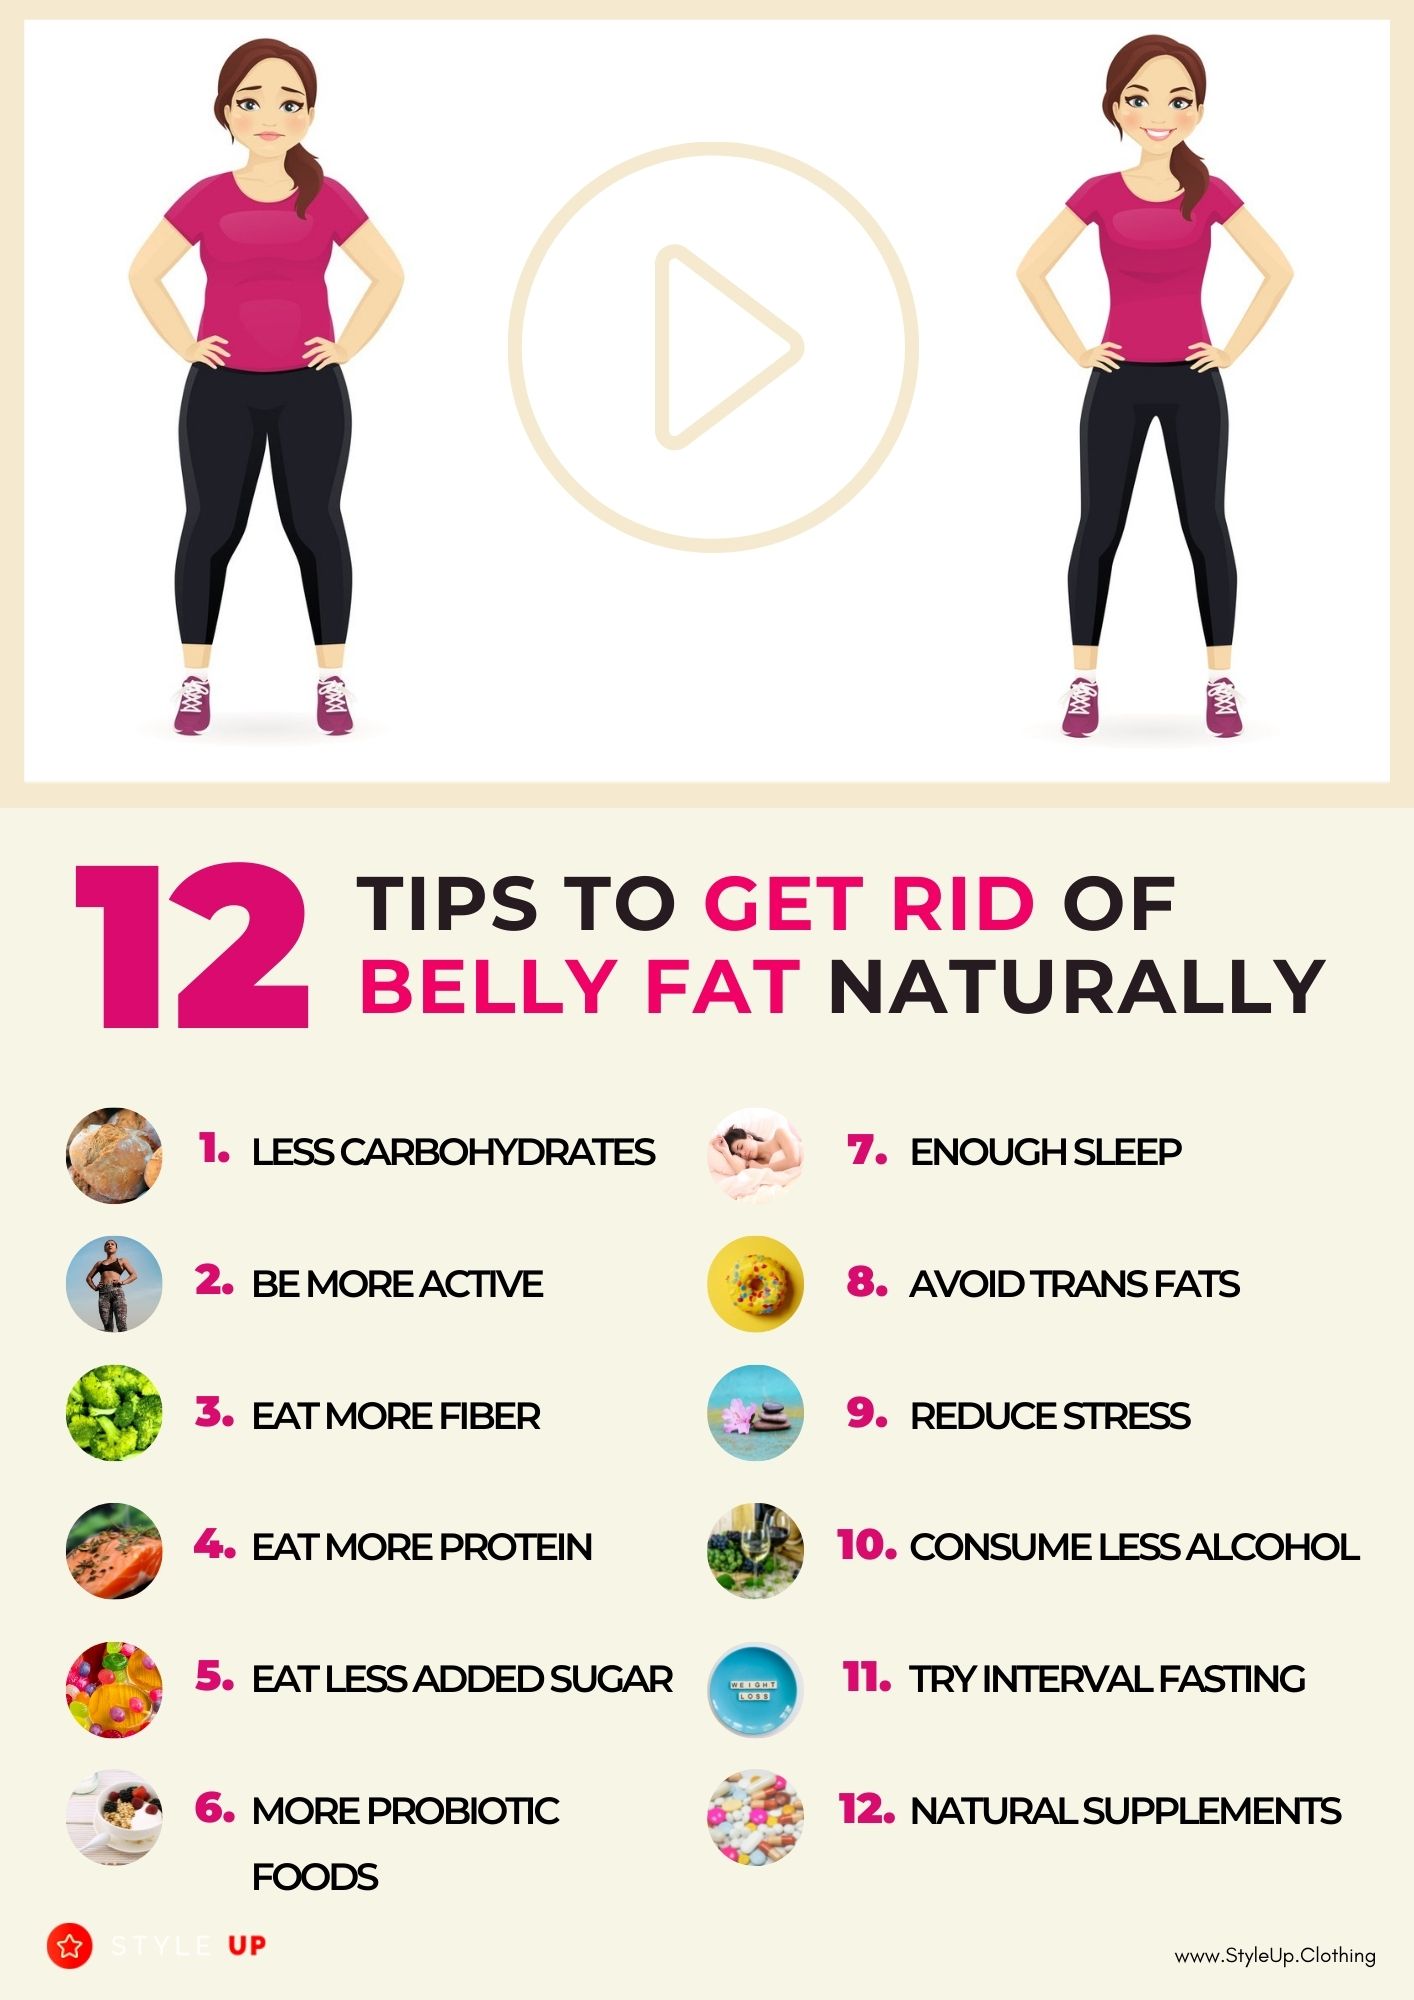 STYLEUP_12_Tips_To_Get_Rid_Of_Belly_Fat_Naturally_How_To_Lose_Visceral_Fat_Fast_Difference_Between_Visceral_Fat_And_Subcutaneous_Fat_Lose_Fat_Healthy_12_Ways_To_Lose_Belly_Fat.jpg